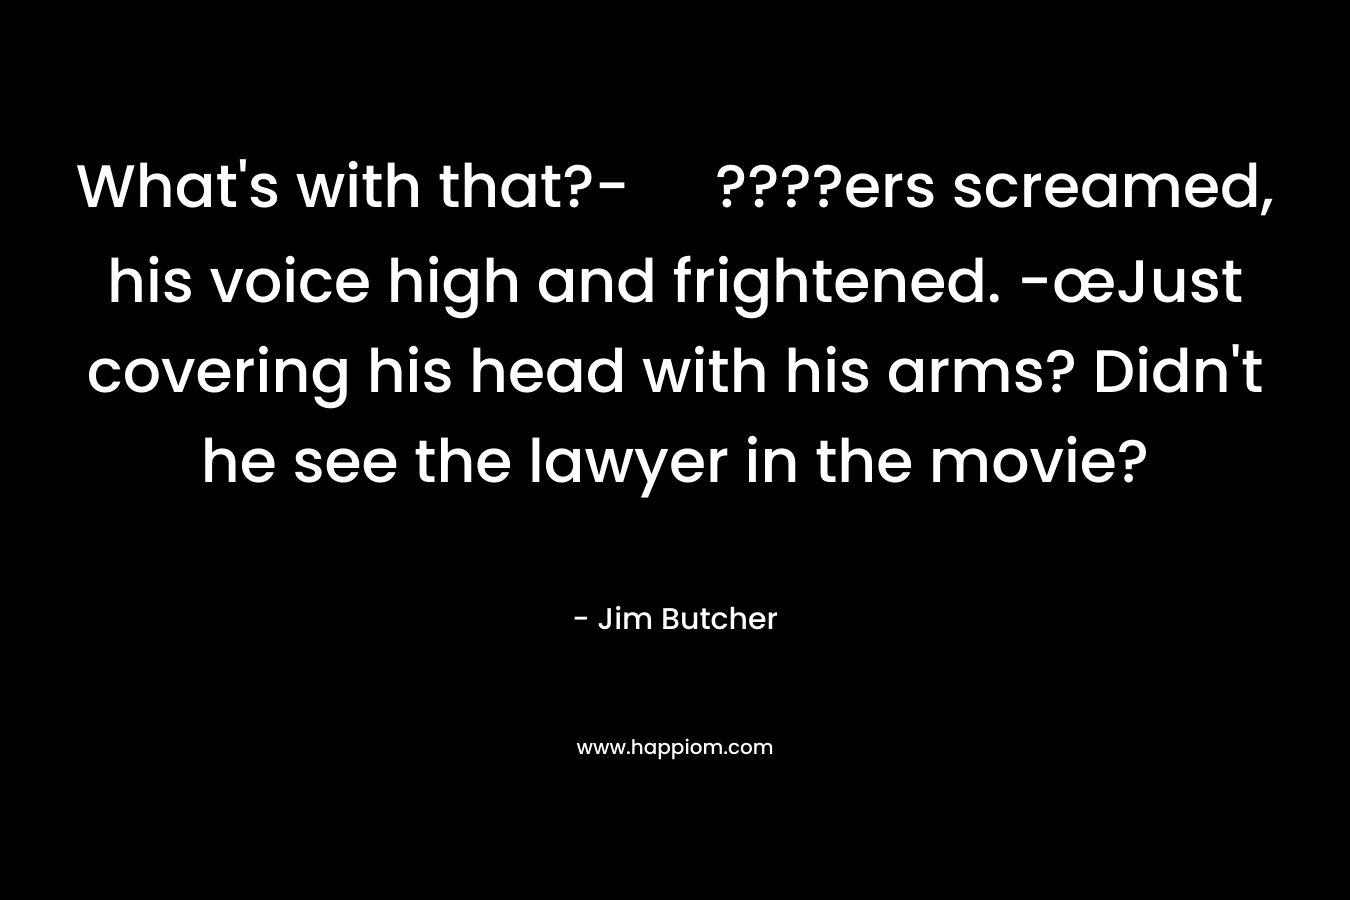 What's with that?- ????ers screamed, his voice high and frightened. -œJust covering his head with his arms? Didn't he see the lawyer in the movie?